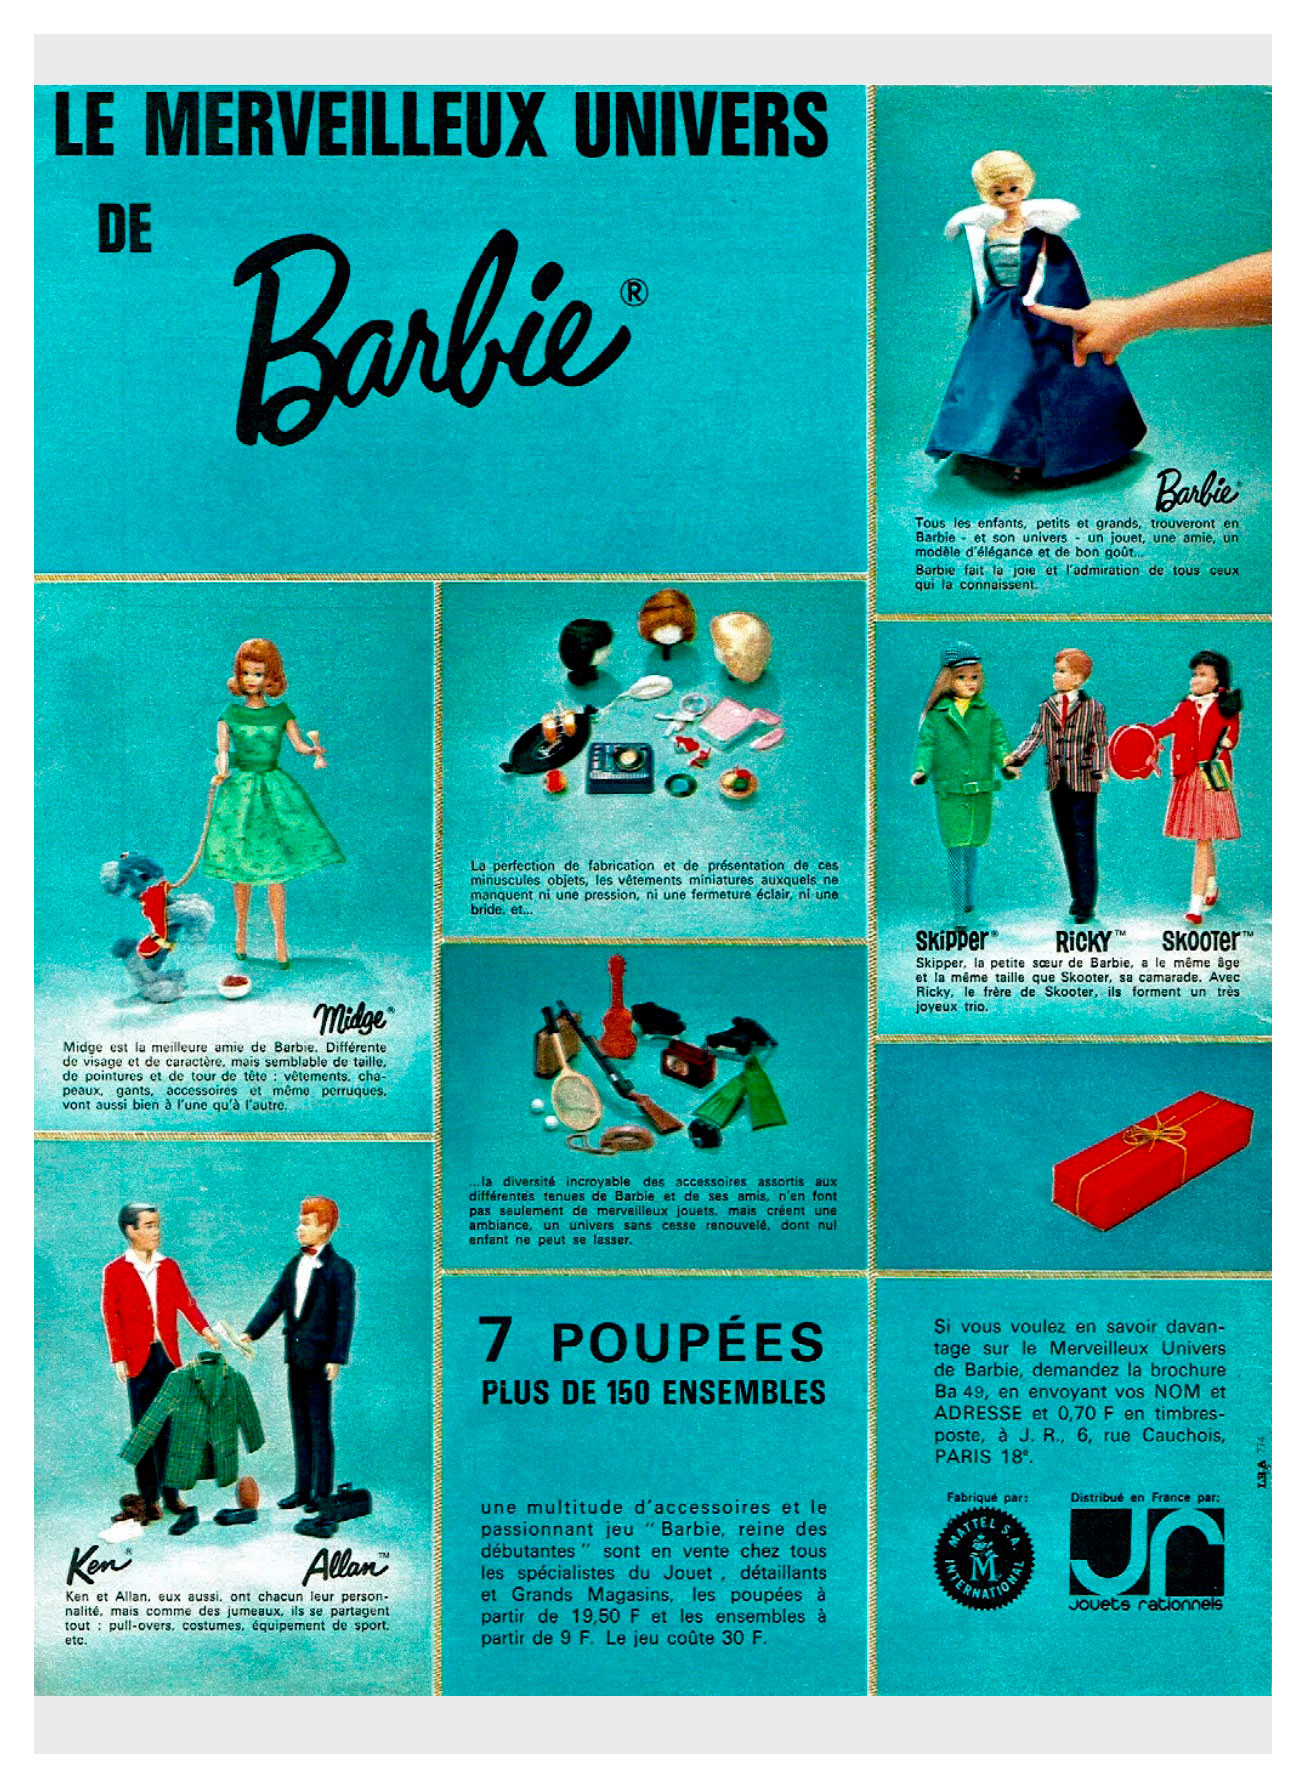 1965 French Jouets rationnels advertisement